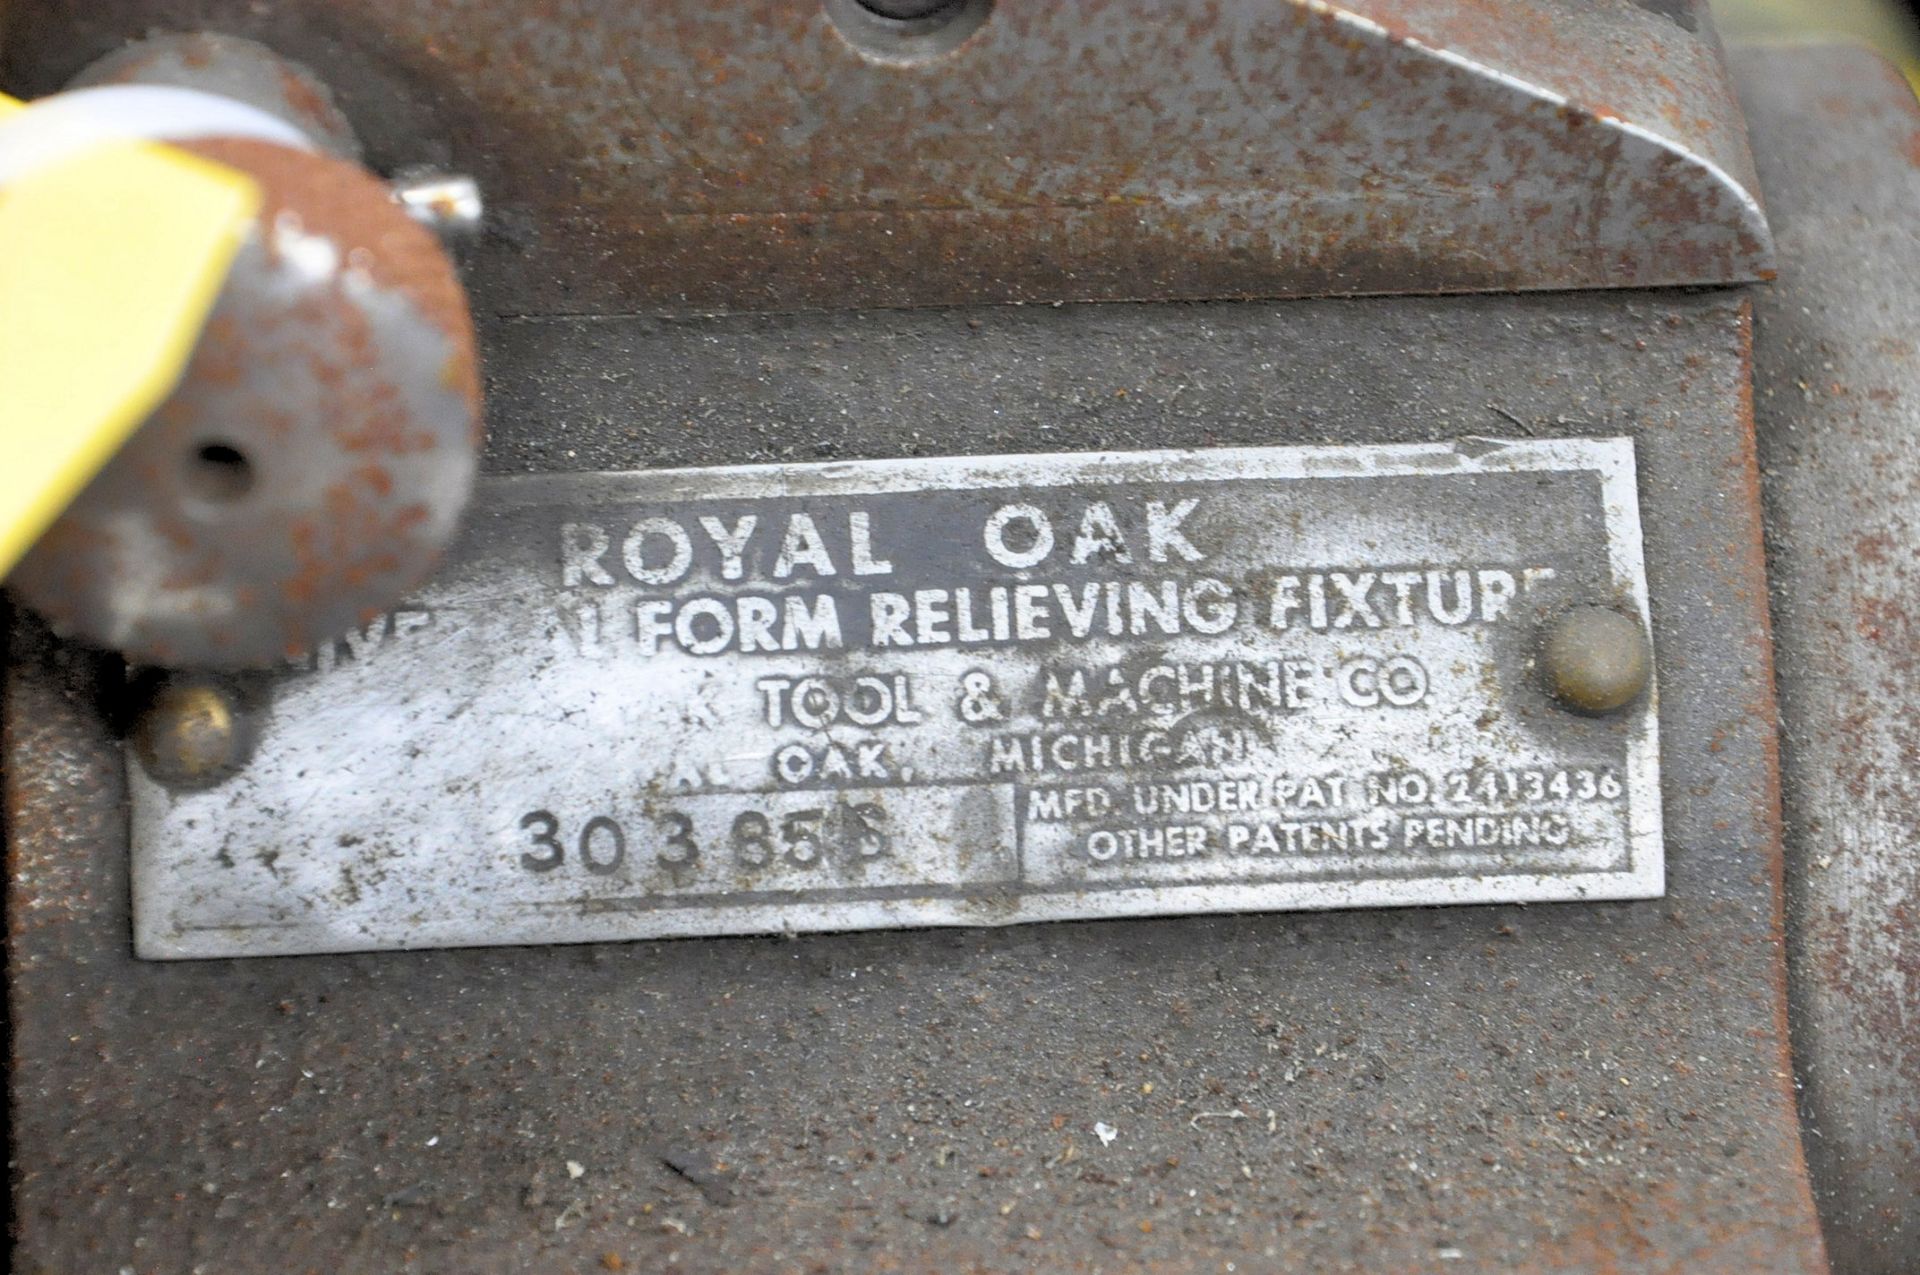 Royal Oak Universal Form Relieving Fixture - Image 2 of 2